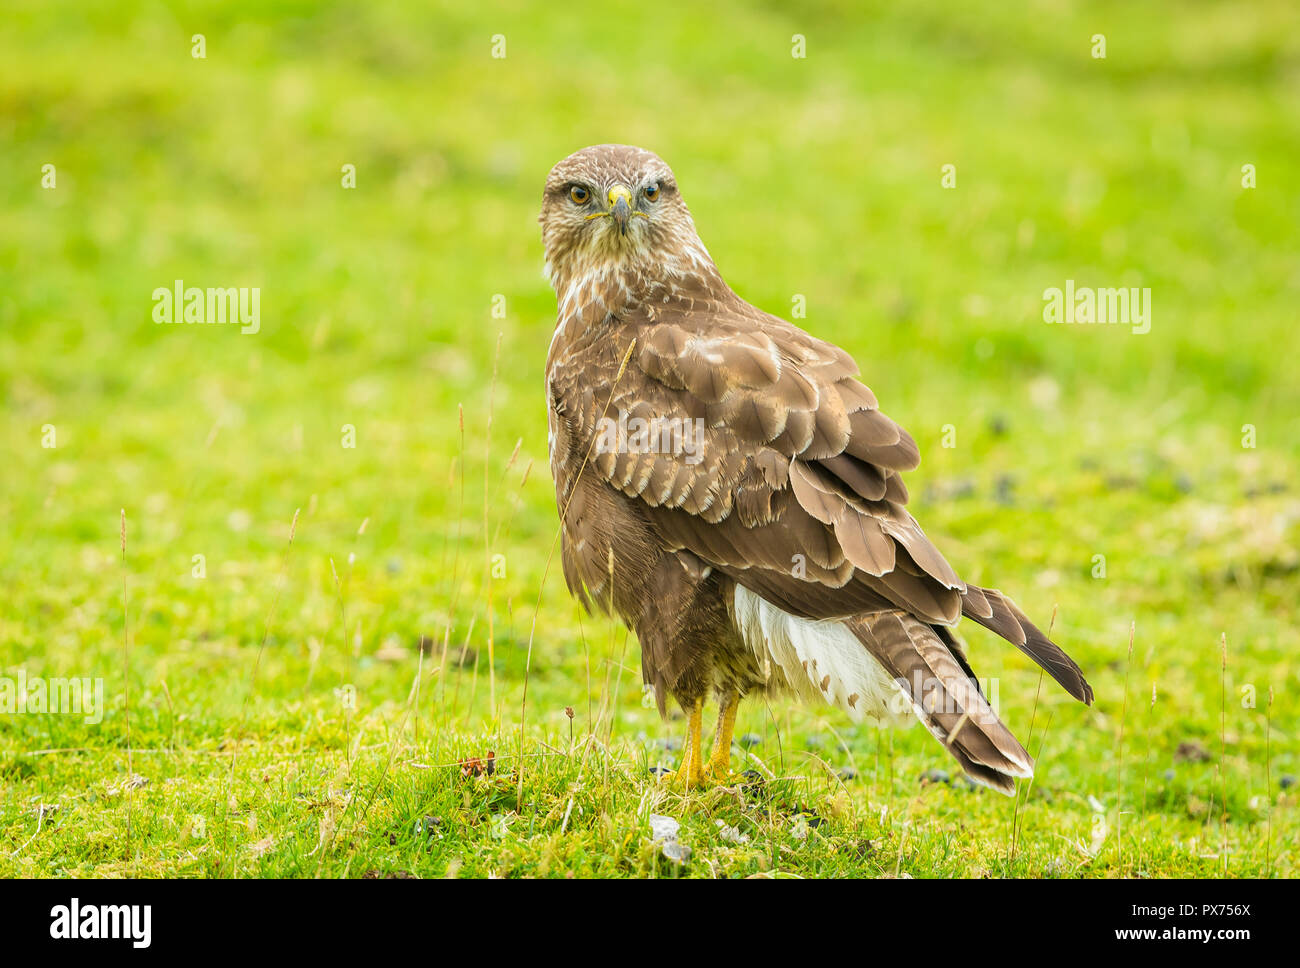 Common Buzzard in the Highlands of Scotland stood on croft land searching the ground for grubs.  Scientific name:  Buteo buteo.  Horizontal. Day time Stock Photo